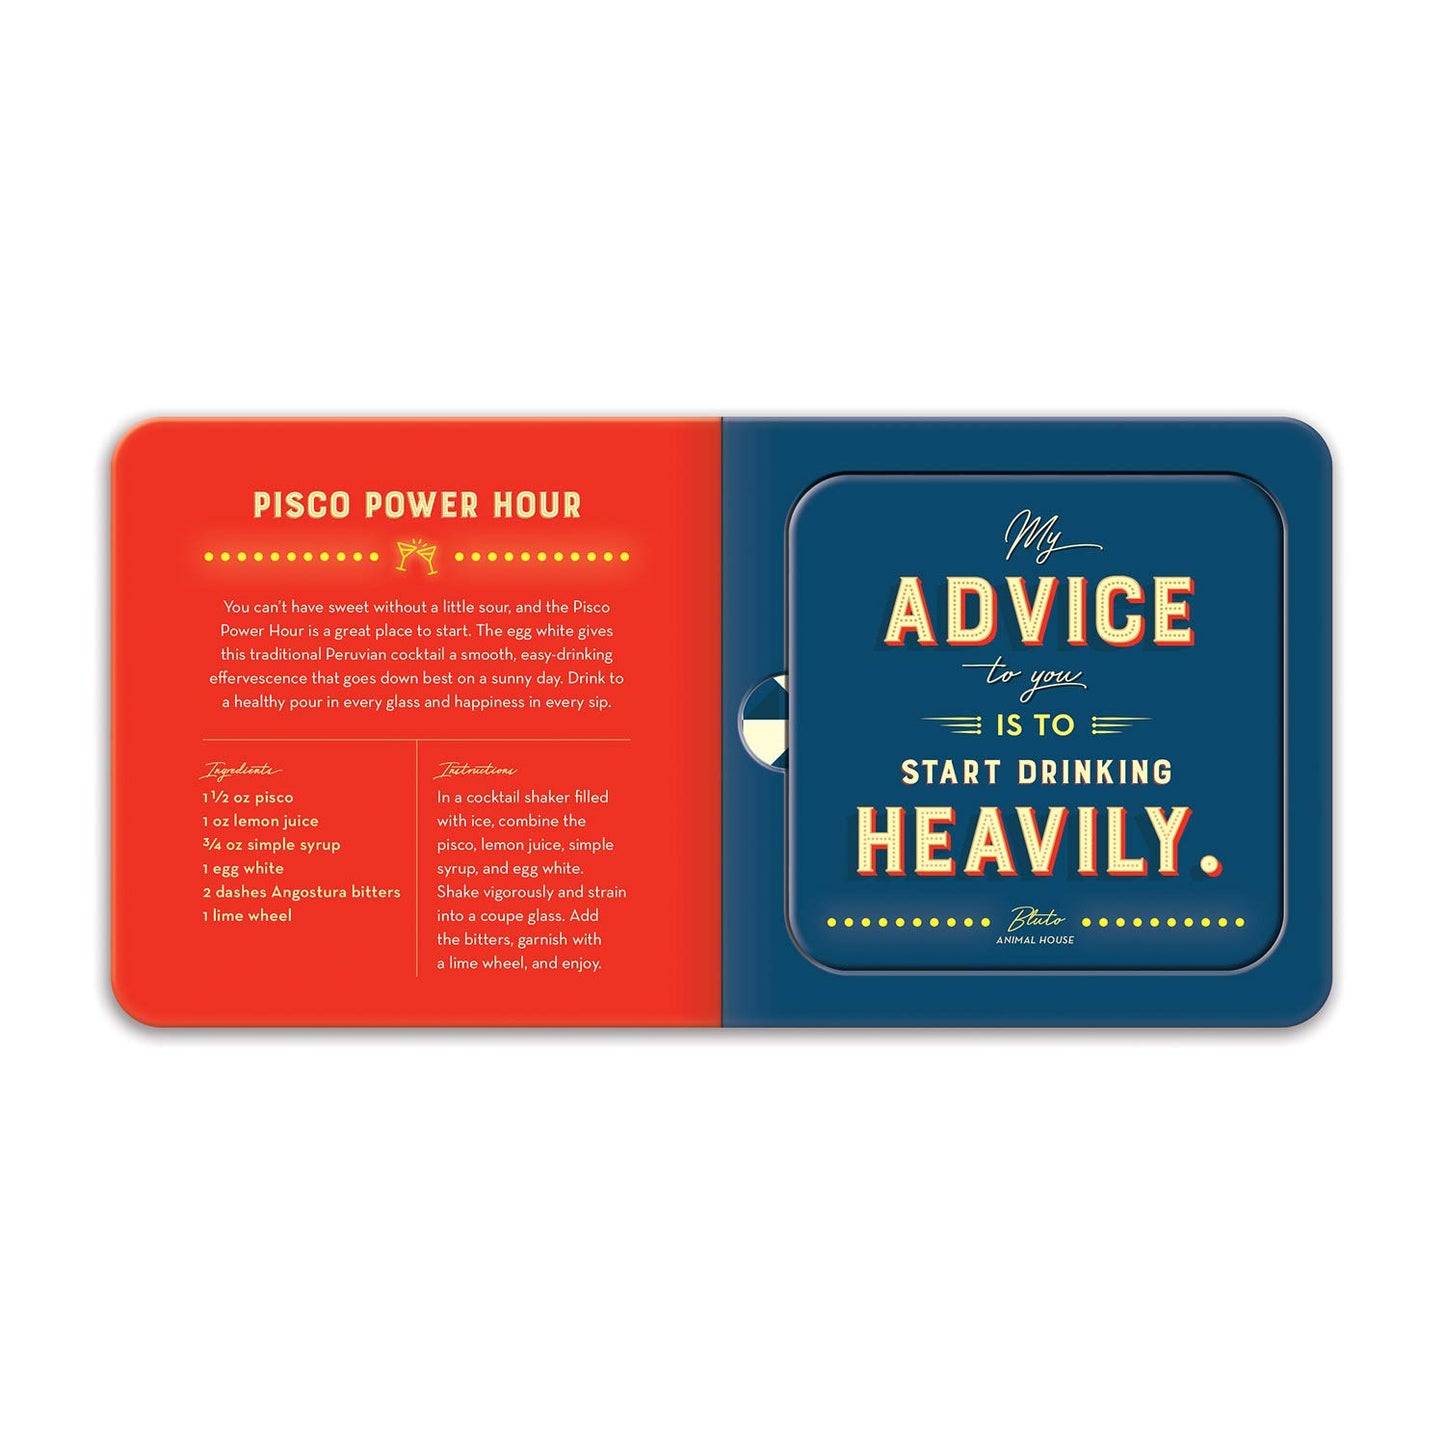 inside view of red and blue pages with a coaster on one side with text "my advice to you..."